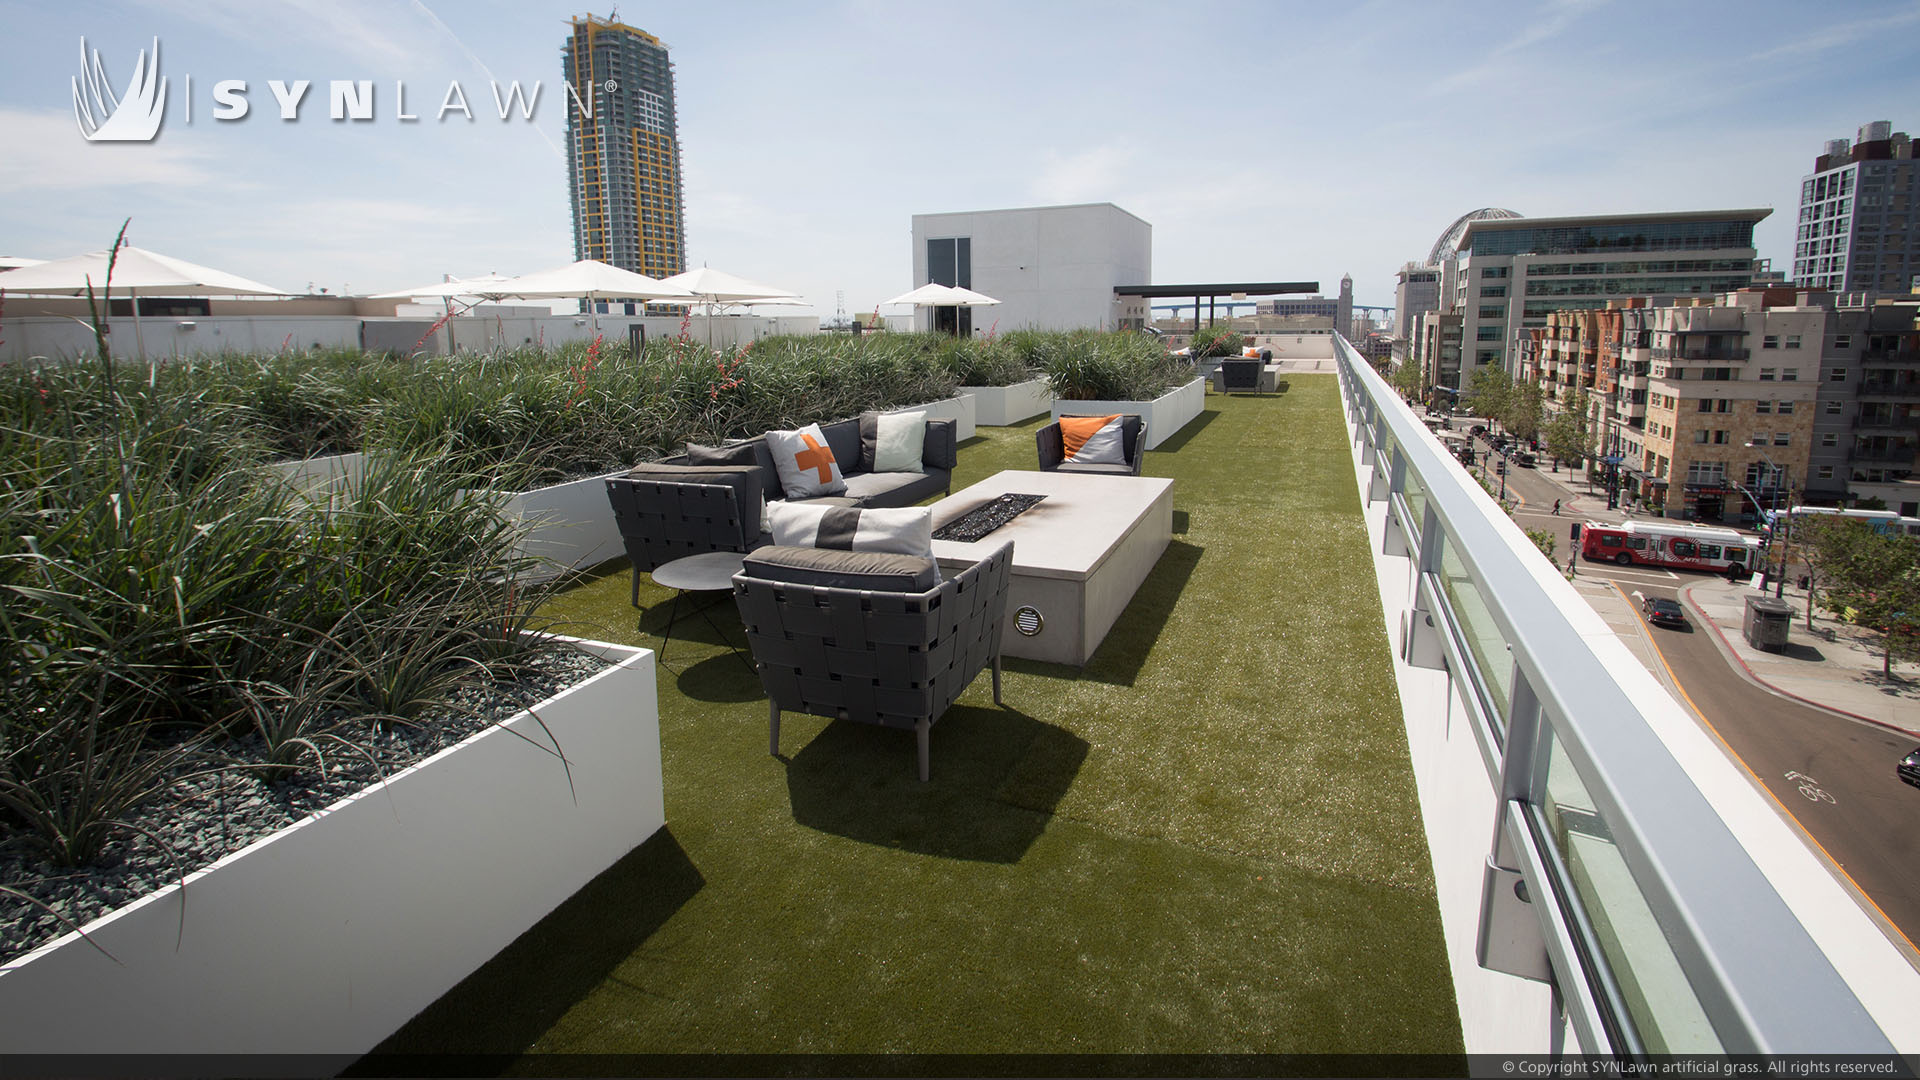 Rooftop artificial grass installation from SYNLawn